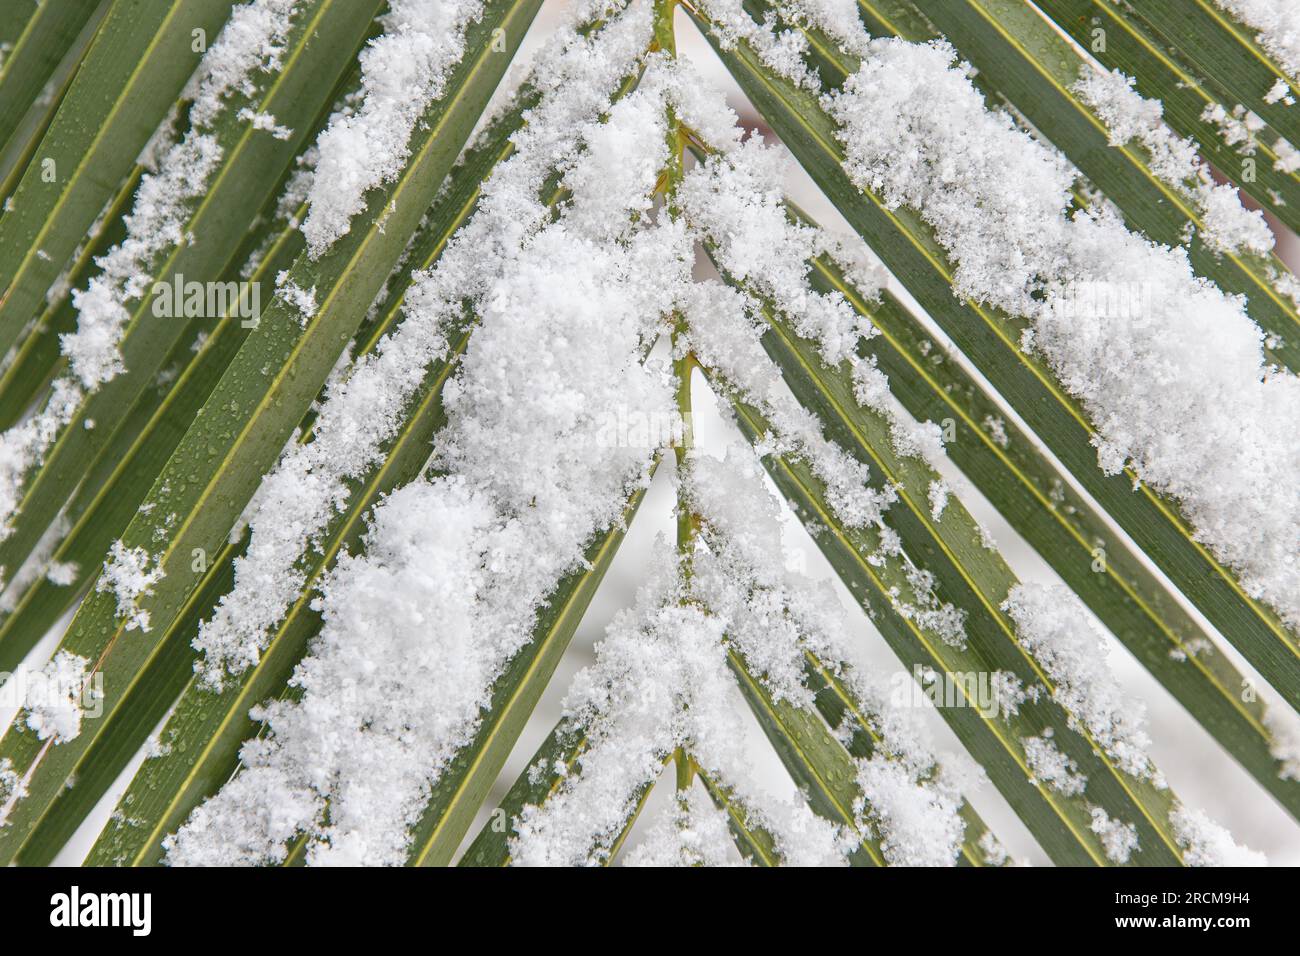 Detail of palm tree leaf covered in snow in full frame shot. Climate change concept. Stock Photo